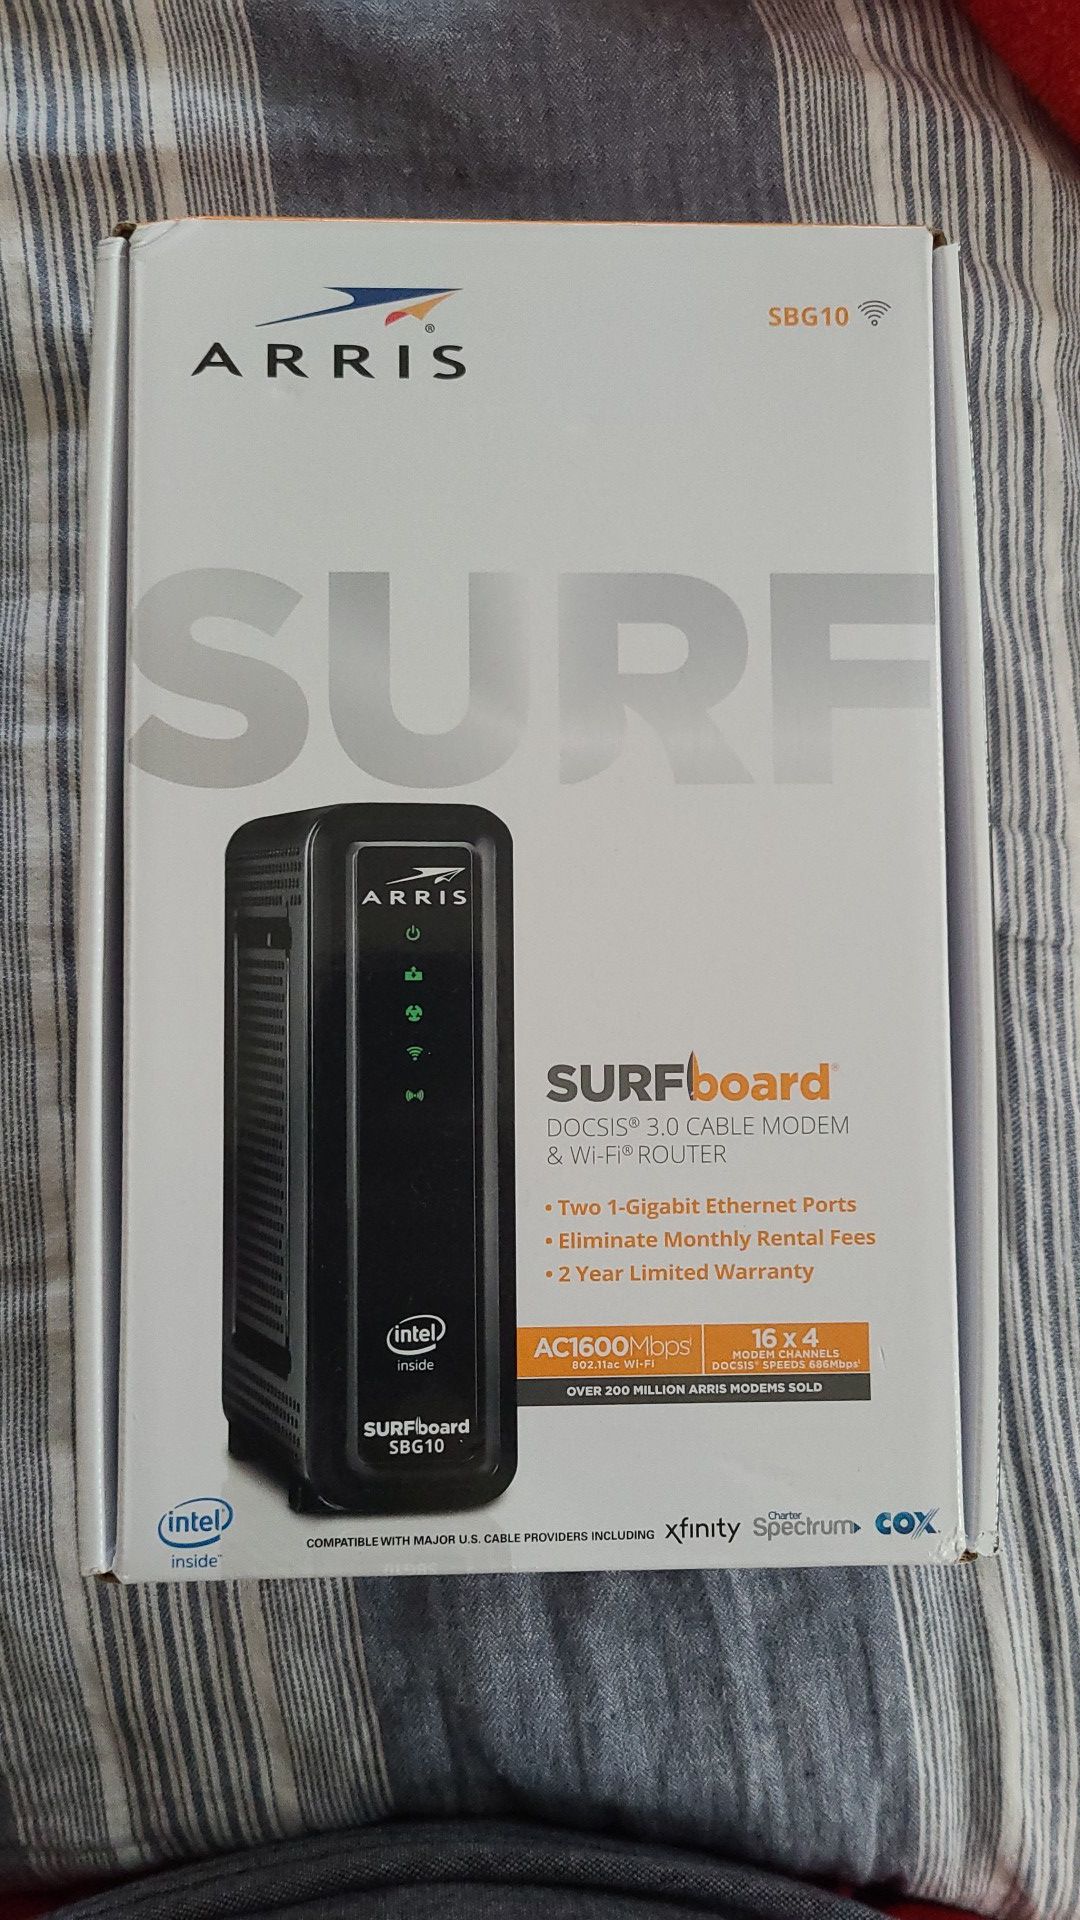 Cable modem an Wi-Fi router